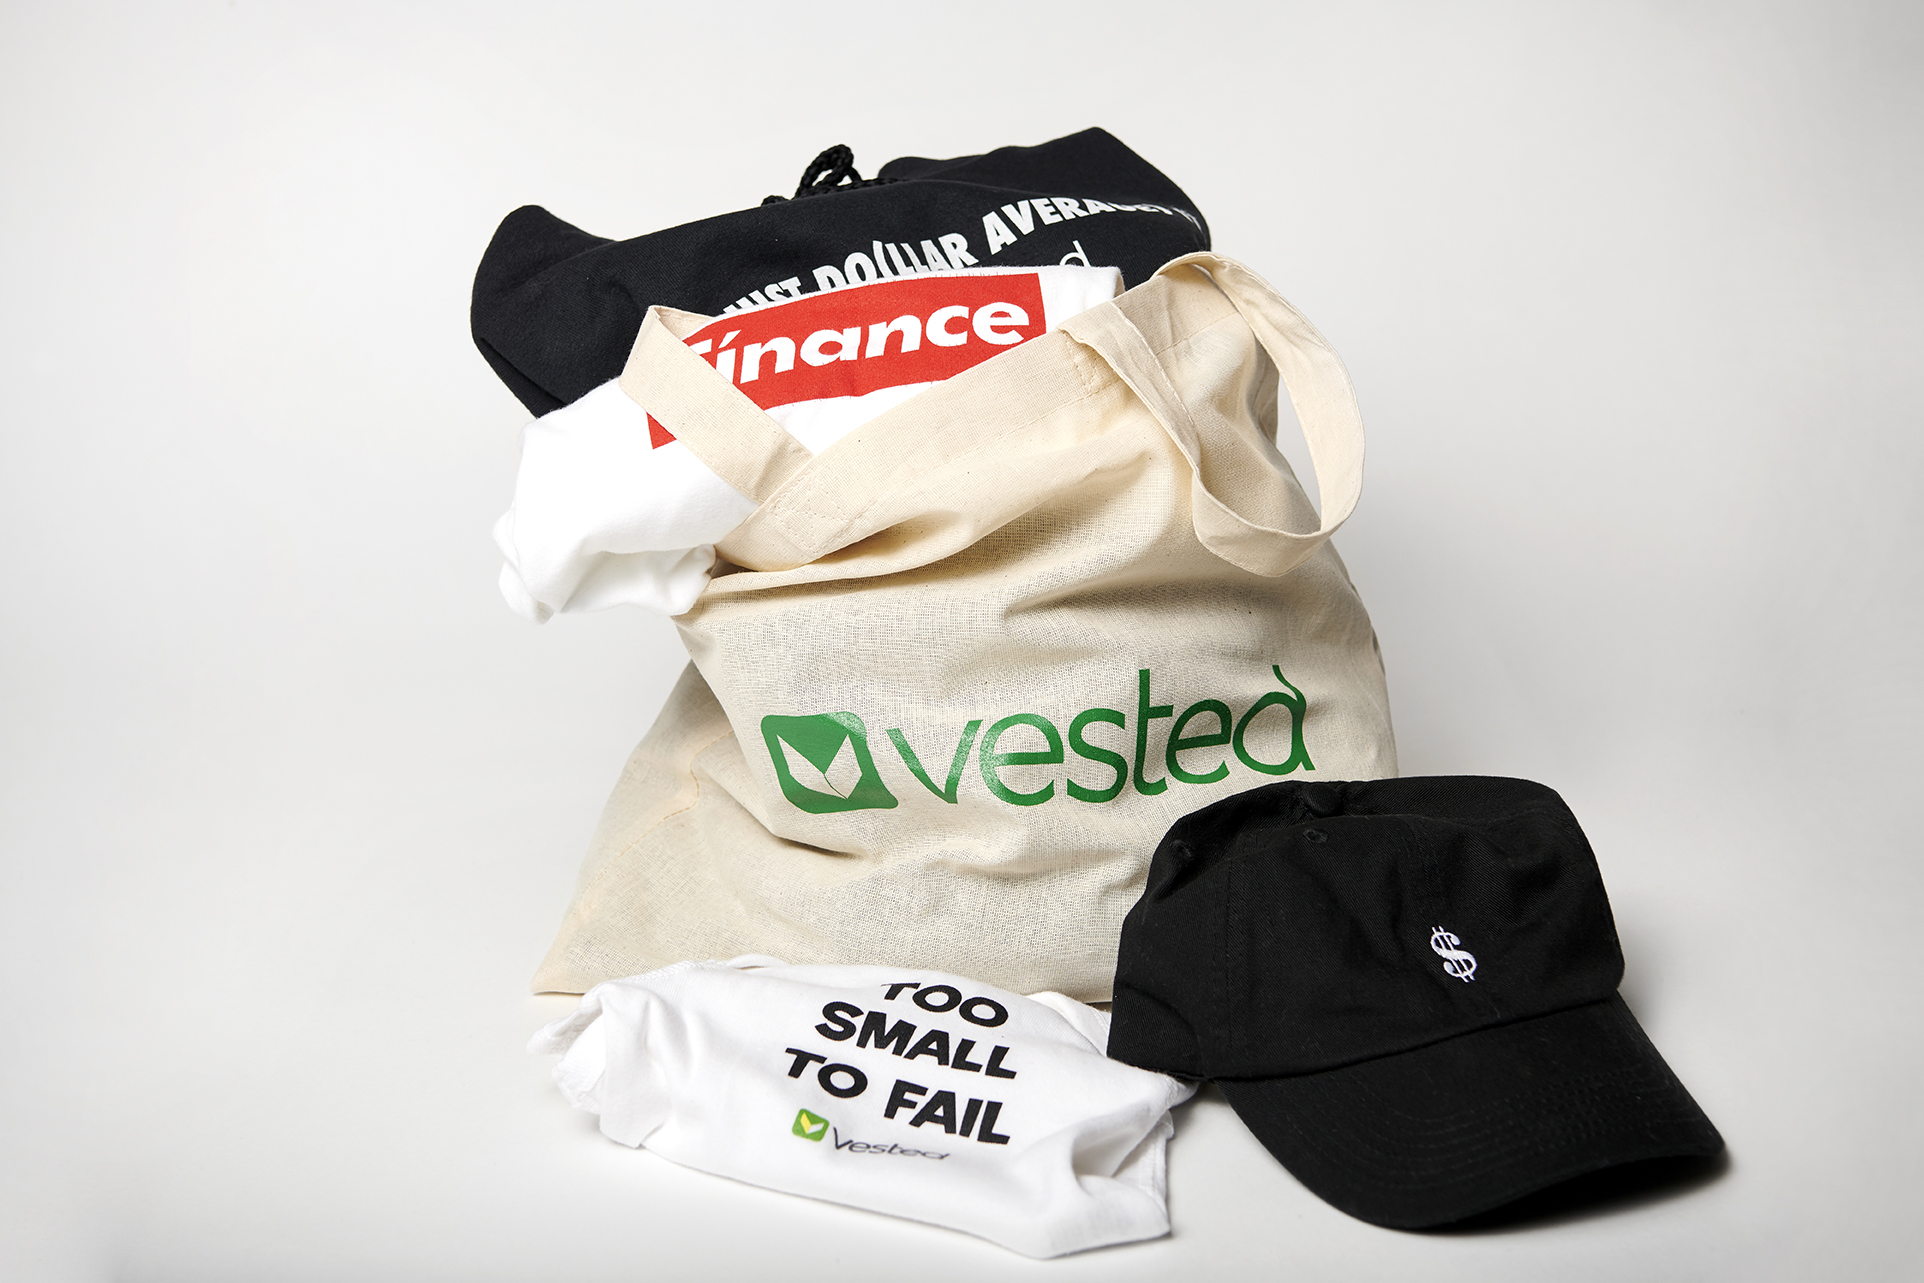 Various printed hats, tote bags, and t-shirts with Vested related logos and slogans.